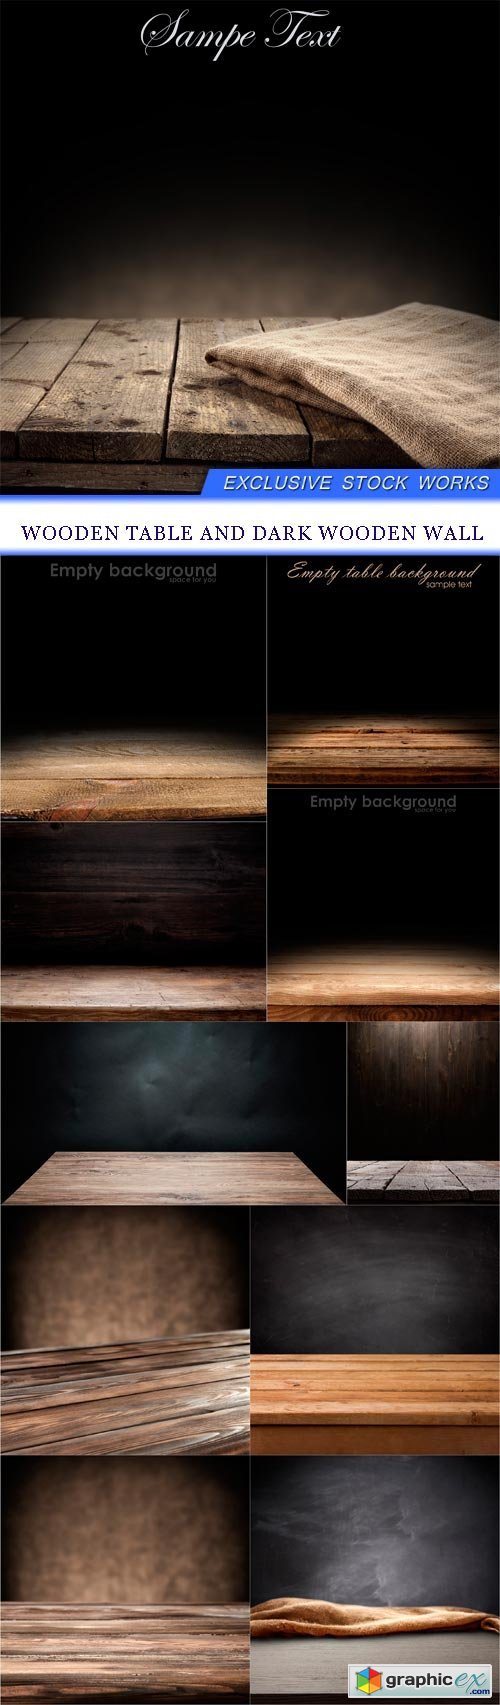 Wooden table and dark wooden wall 11X JPEG